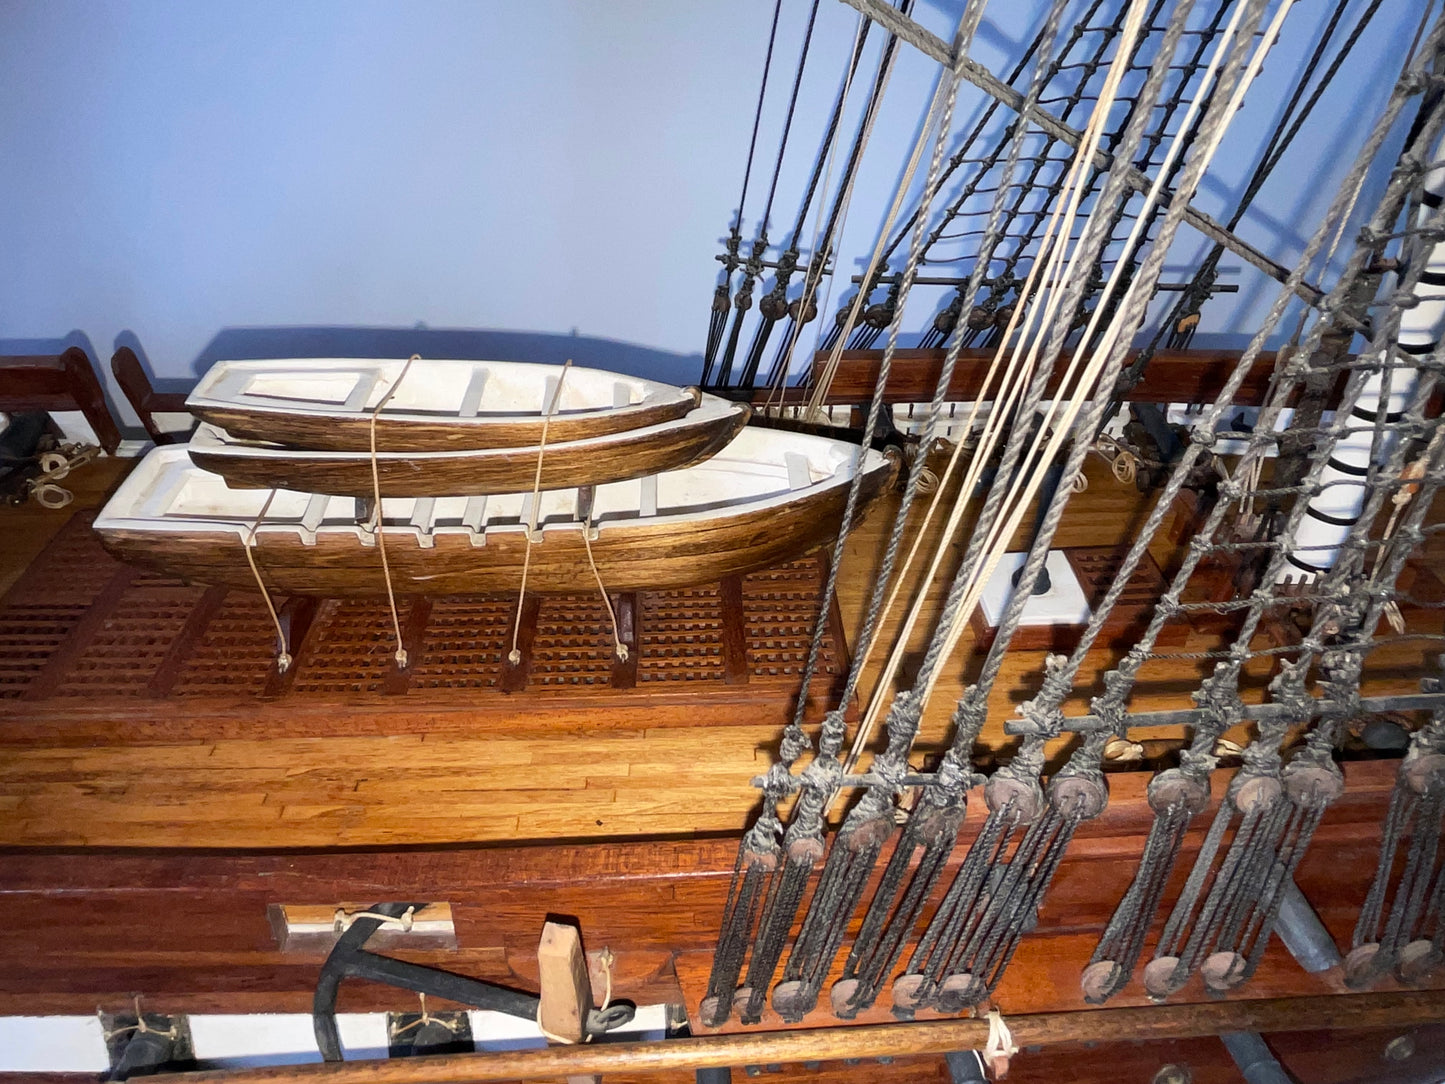 Large Model of the USS Constitution